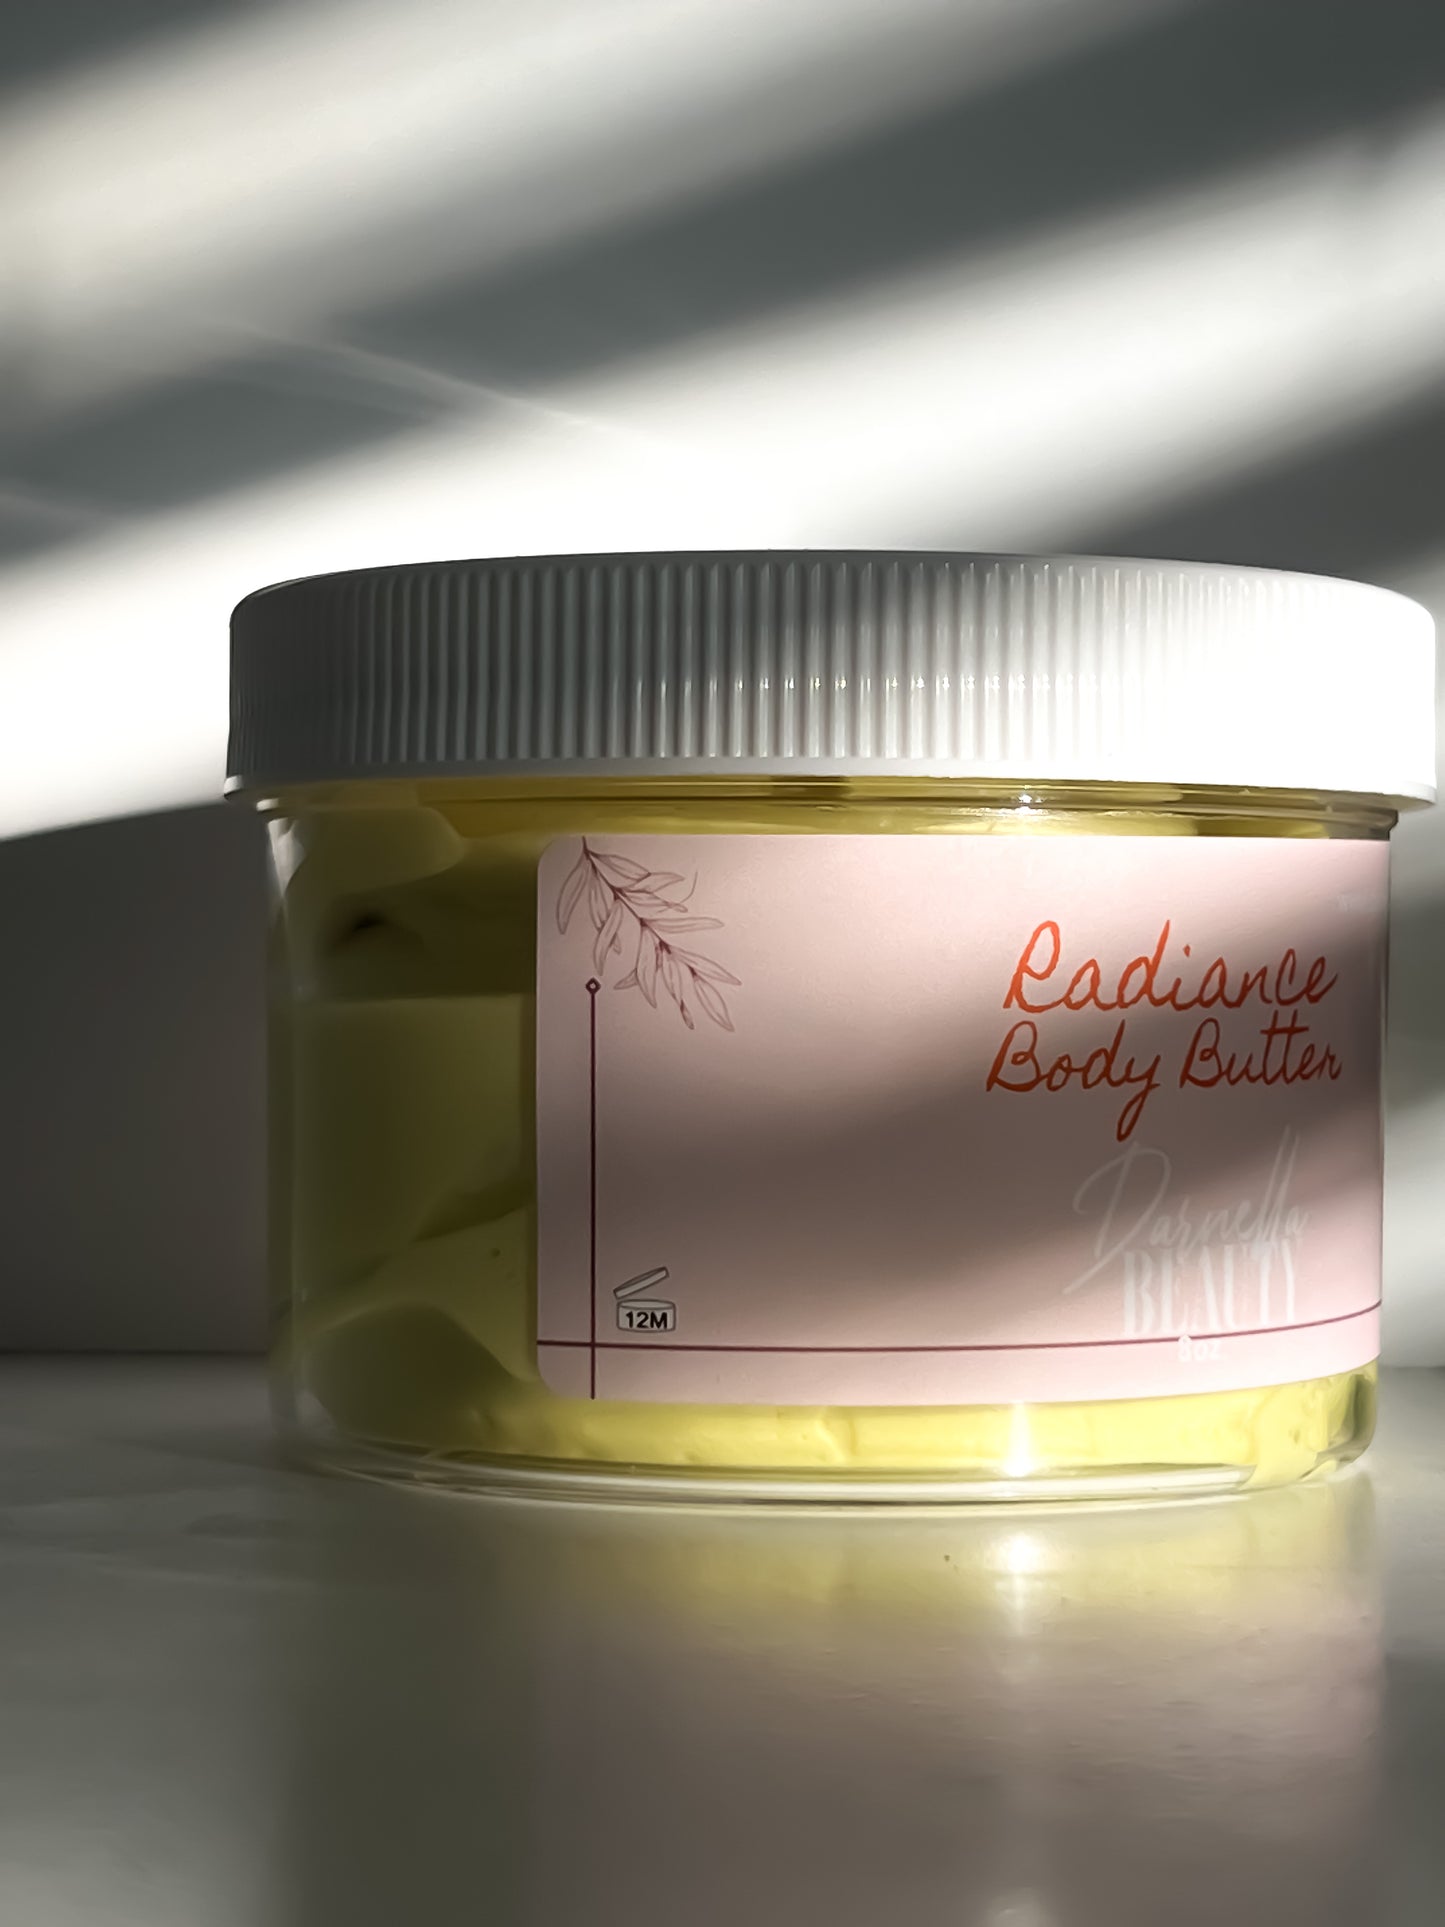 Radiance Butter